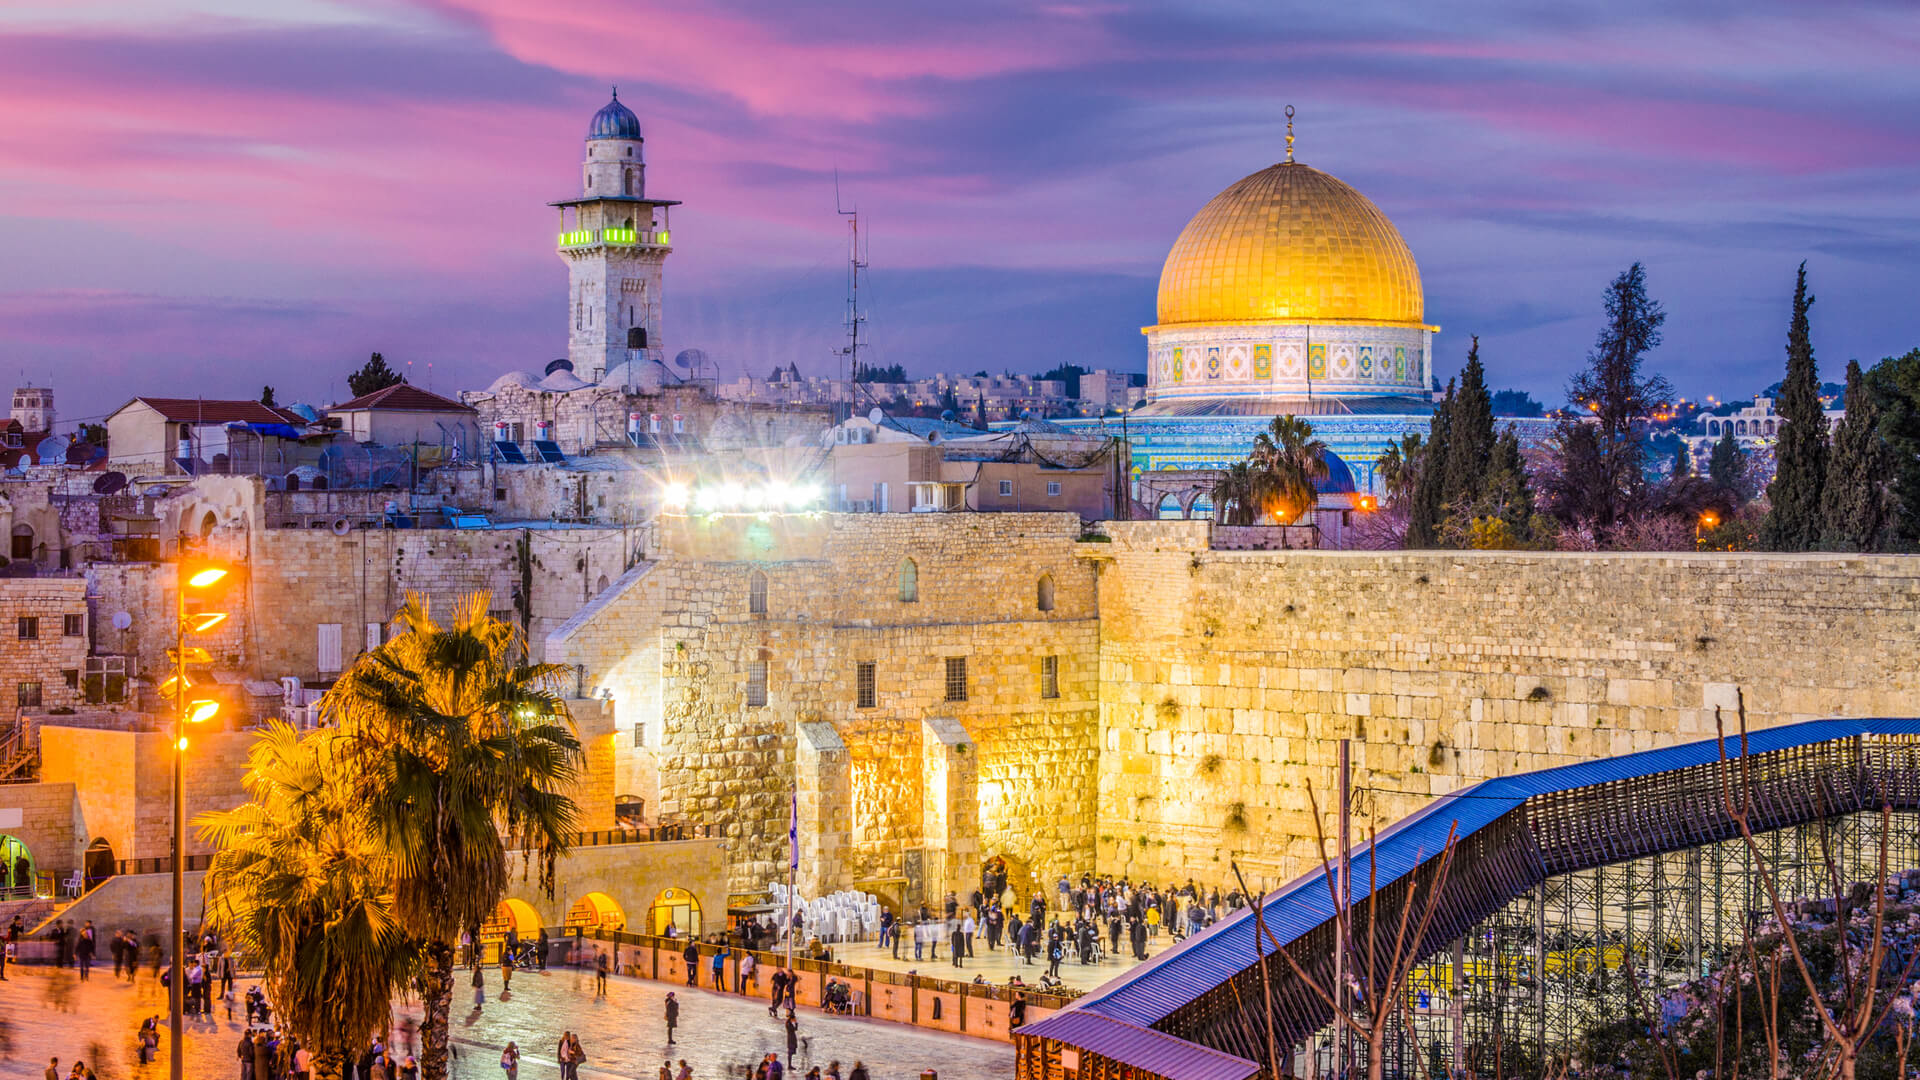 The Western Wall and the Dome of the Rock in Jerusalem, Israel